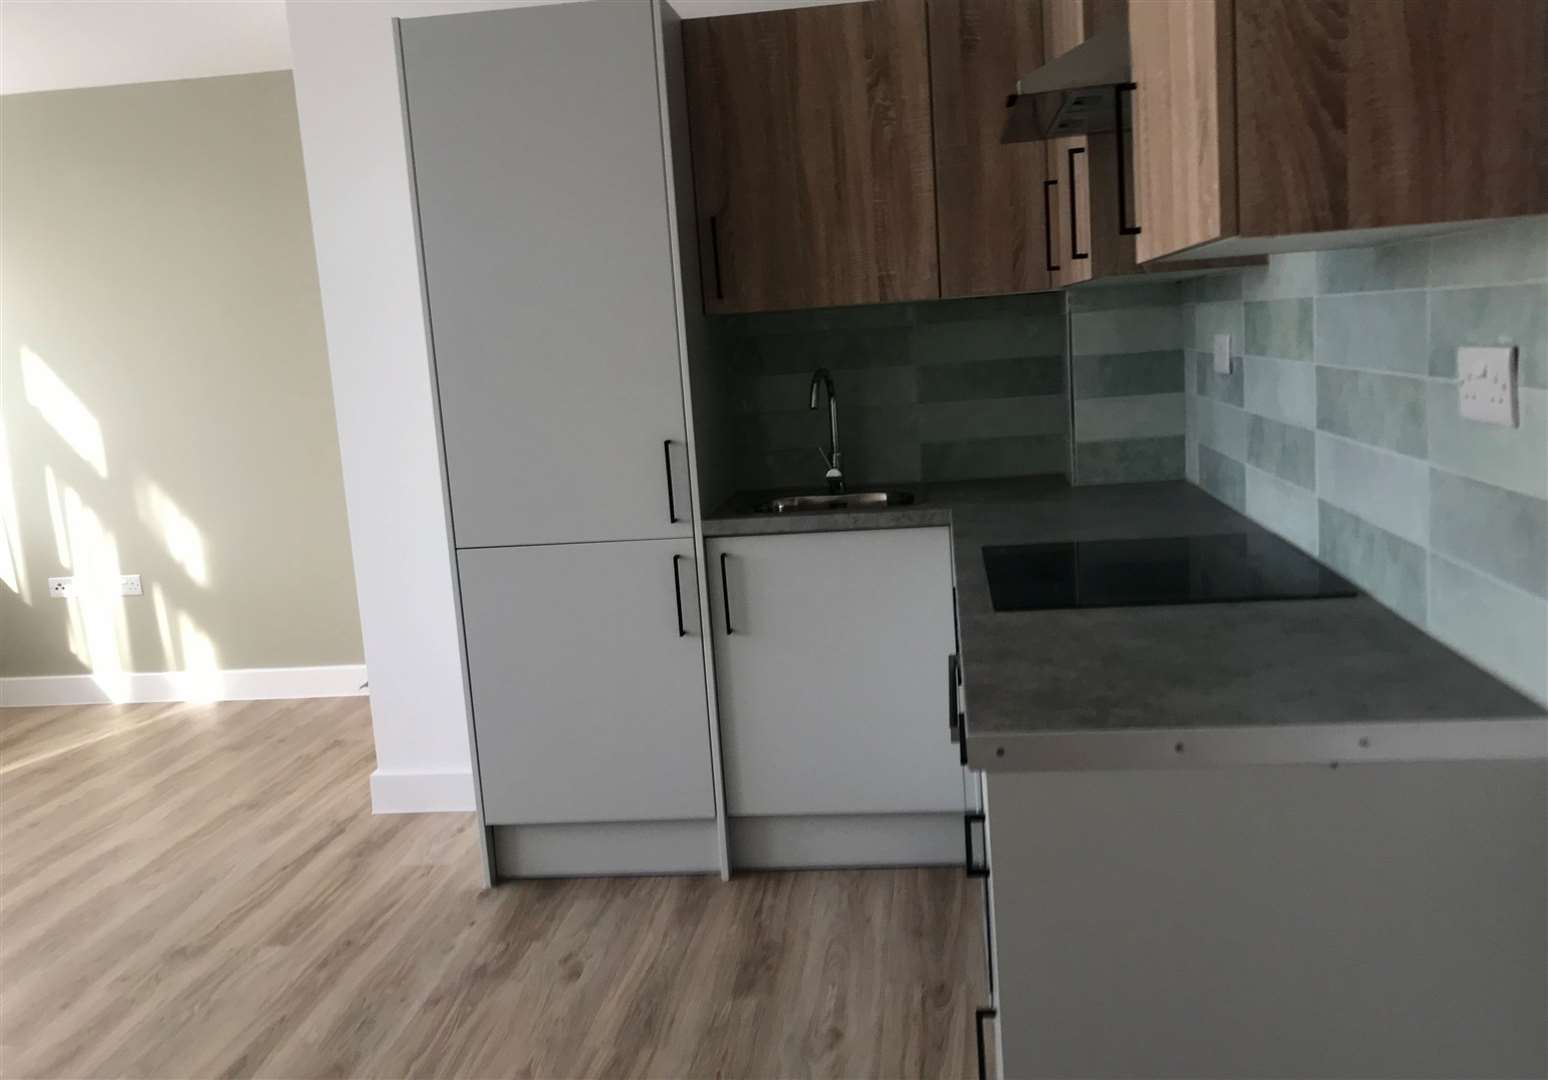 Each of the 81 apartments has a fully fitted kitchen